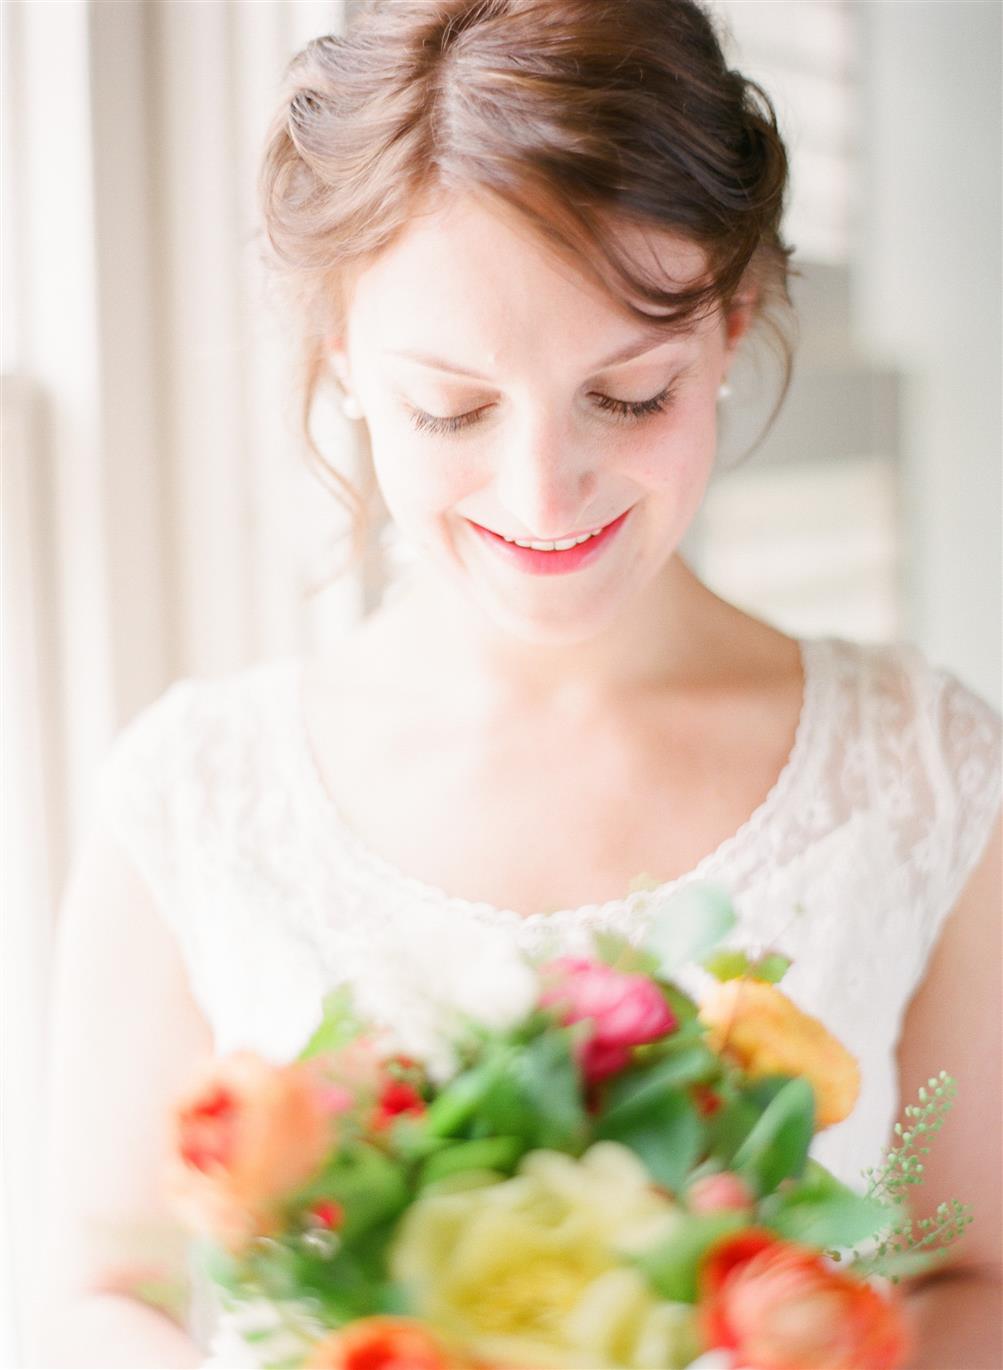 Bride - A 1940s Wedding Dress for a Sweet Early Summer Wedding from Taylor & Porter Photography